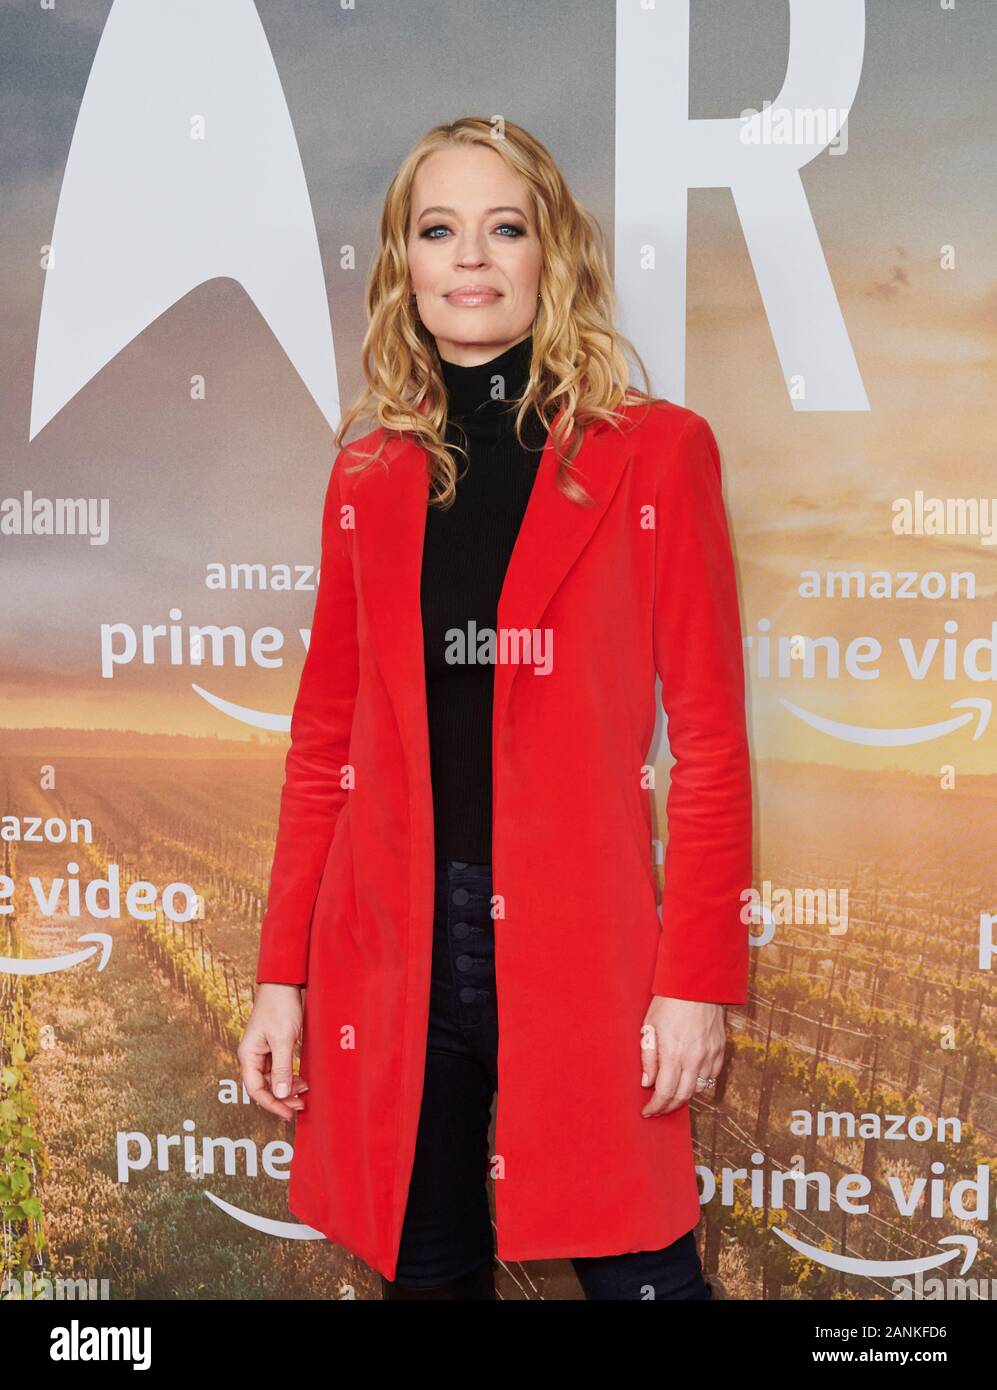 Berlin, Germany. 17th Jan, 2020. Actress Jeri Ryan comes to the 'Star Trek: Picard' event at the Zoo Palast. Credit: Annette Riedl/dpa/Alamy Live News Stock Photo